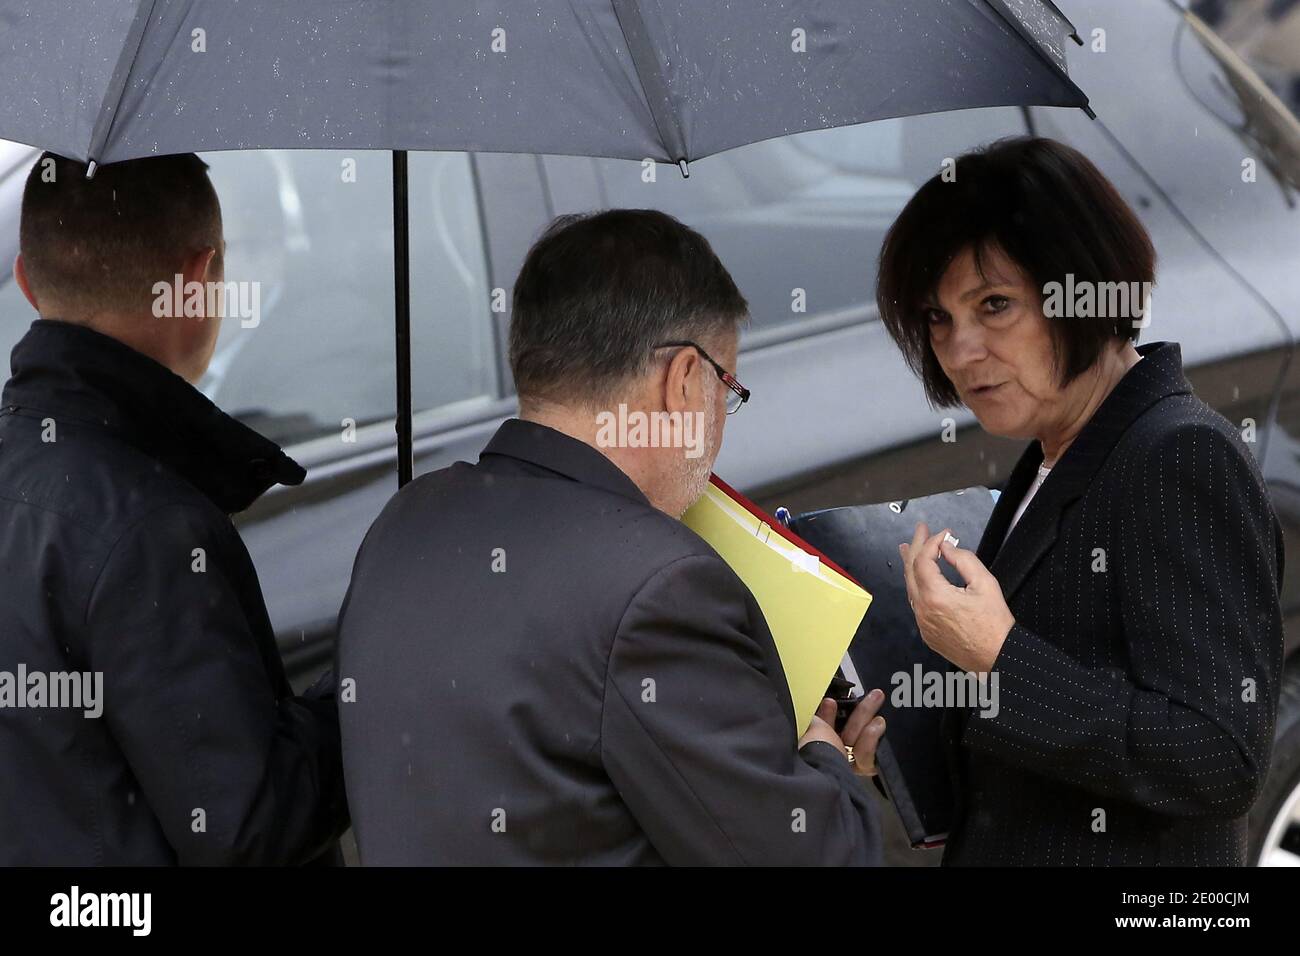 French Minister in Charge of Relations with the Parliament Alain Vidalies and Junior Minister for Disabled People Marie-Arlette Carlotti leave the Elysee presidential Palace after the weekly cabinet meeting, in Paris, France on October 16, 2013. Photo by Stephane Lemouton/ABACAPRESS.COM Stock Photo